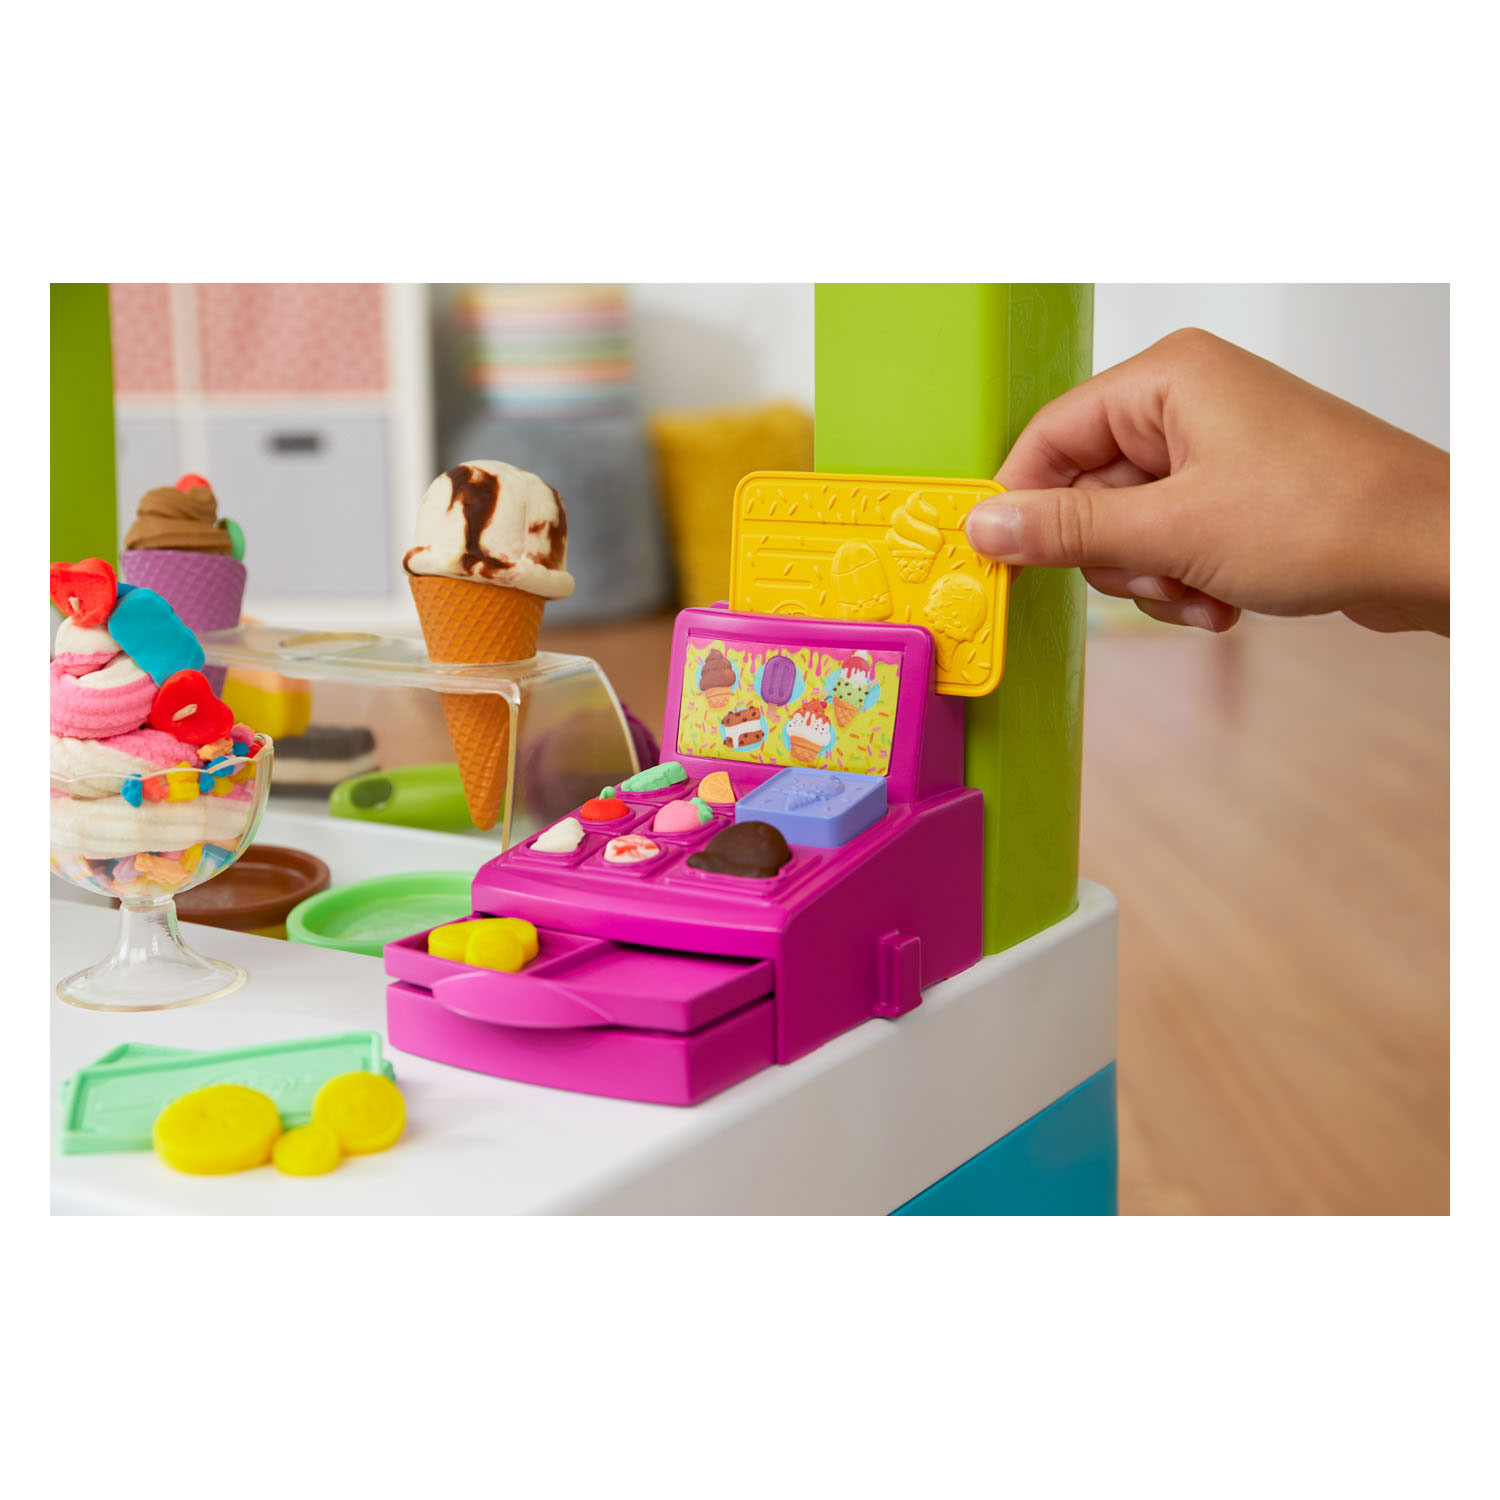 Eiswagen-Spielset Toys Ultimate Play-Doh Thimble |